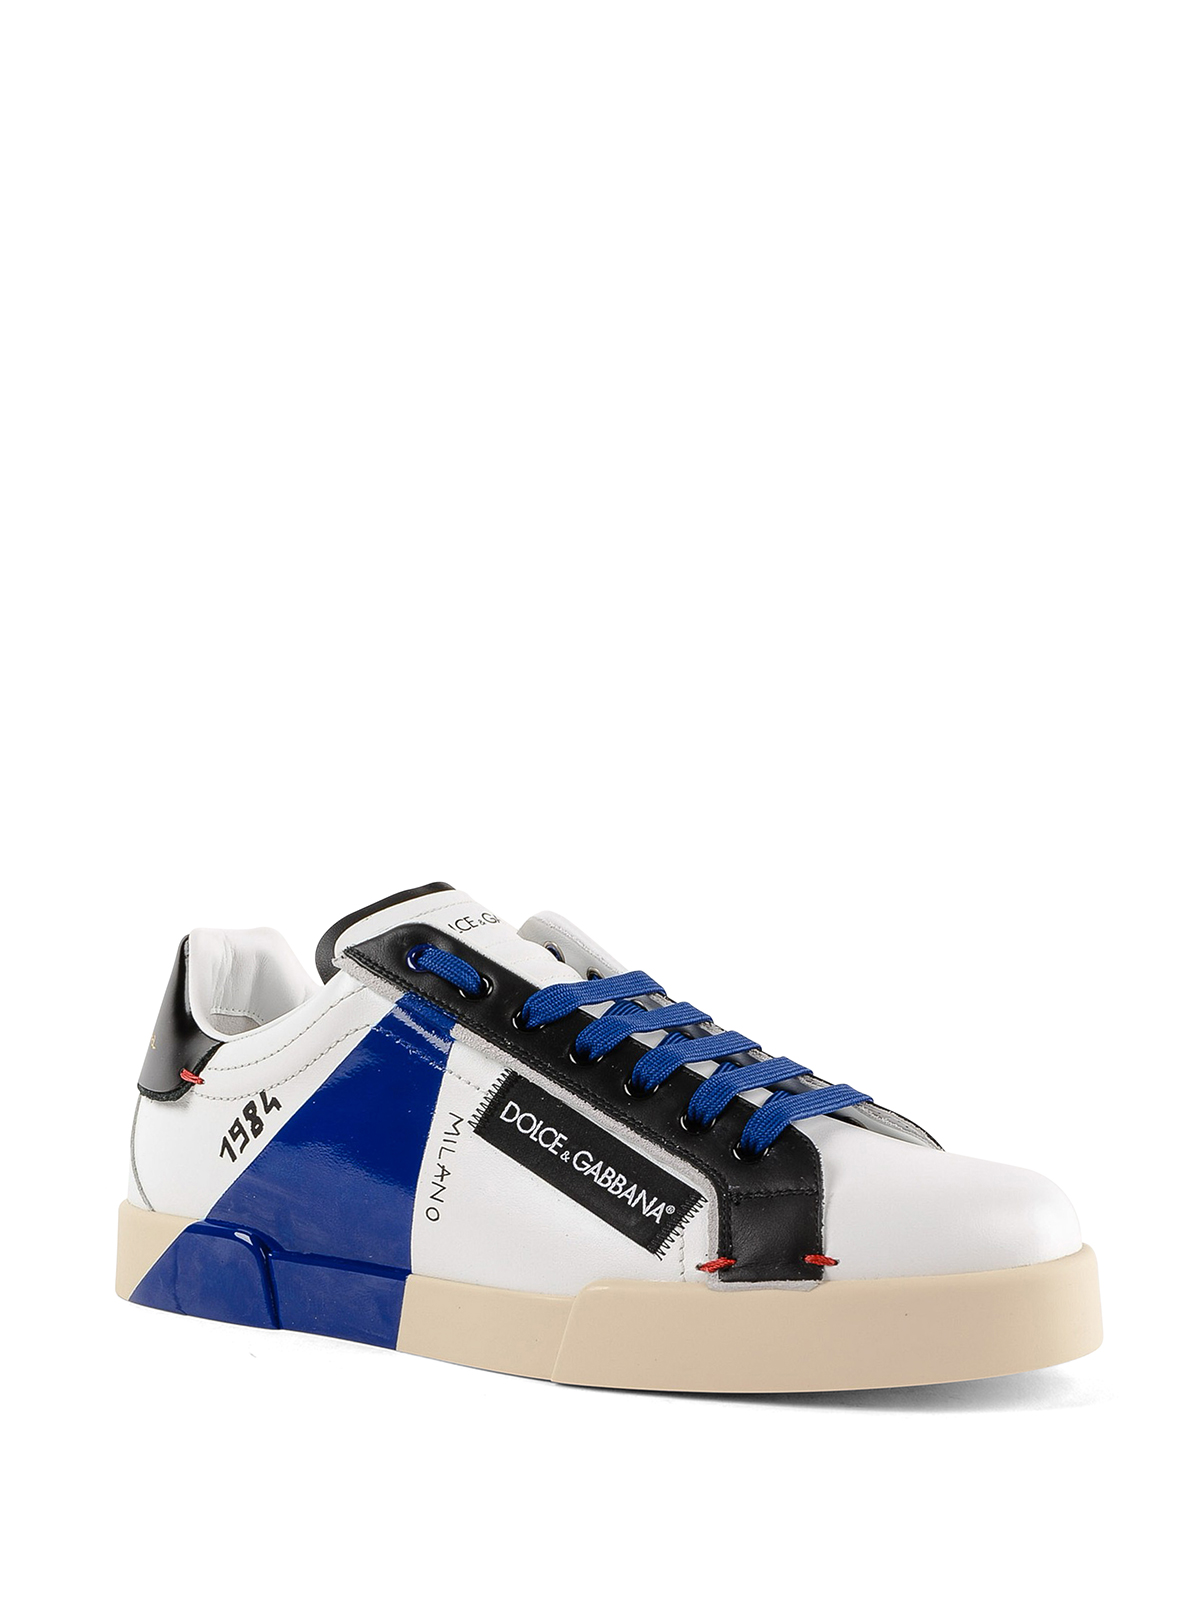 dolce and gabbana 1984 sneakers